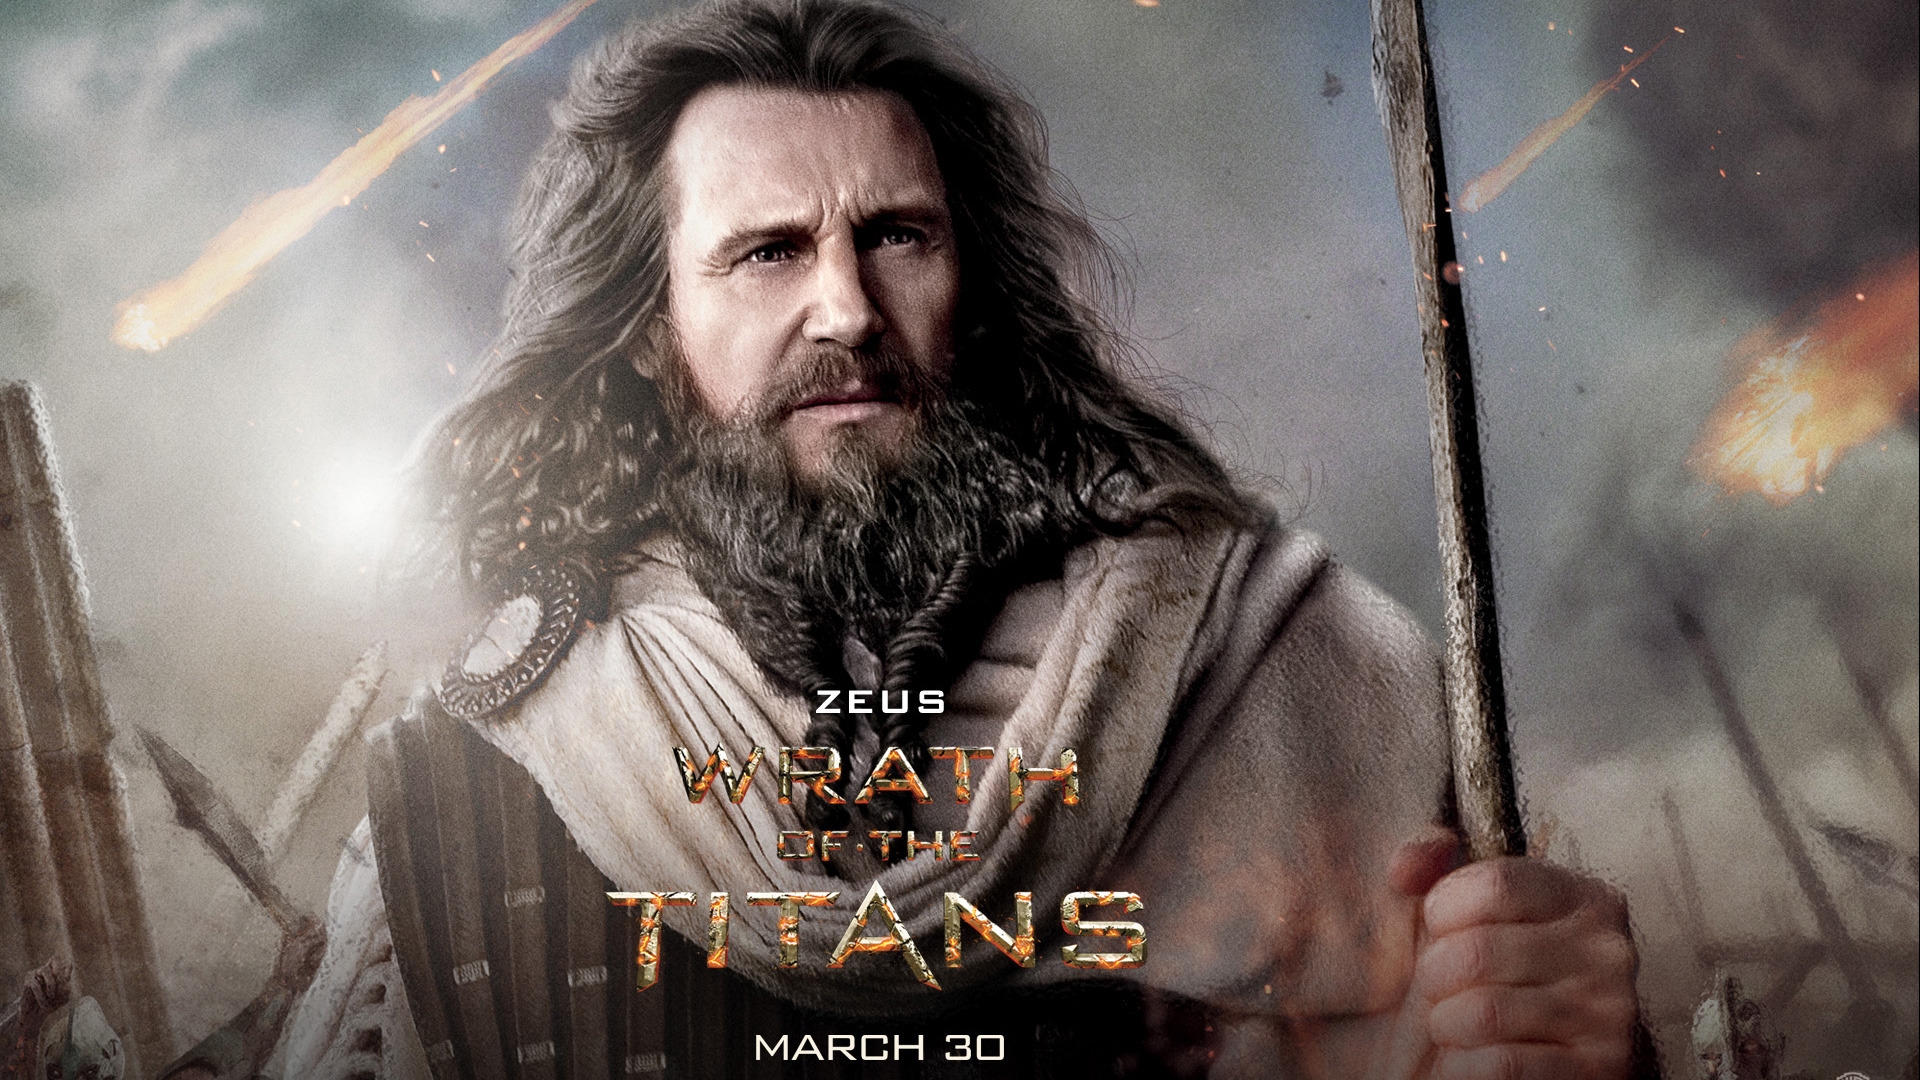 Zeus Wrath of the Titans for 1920 x 1080 HDTV 1080p resolution